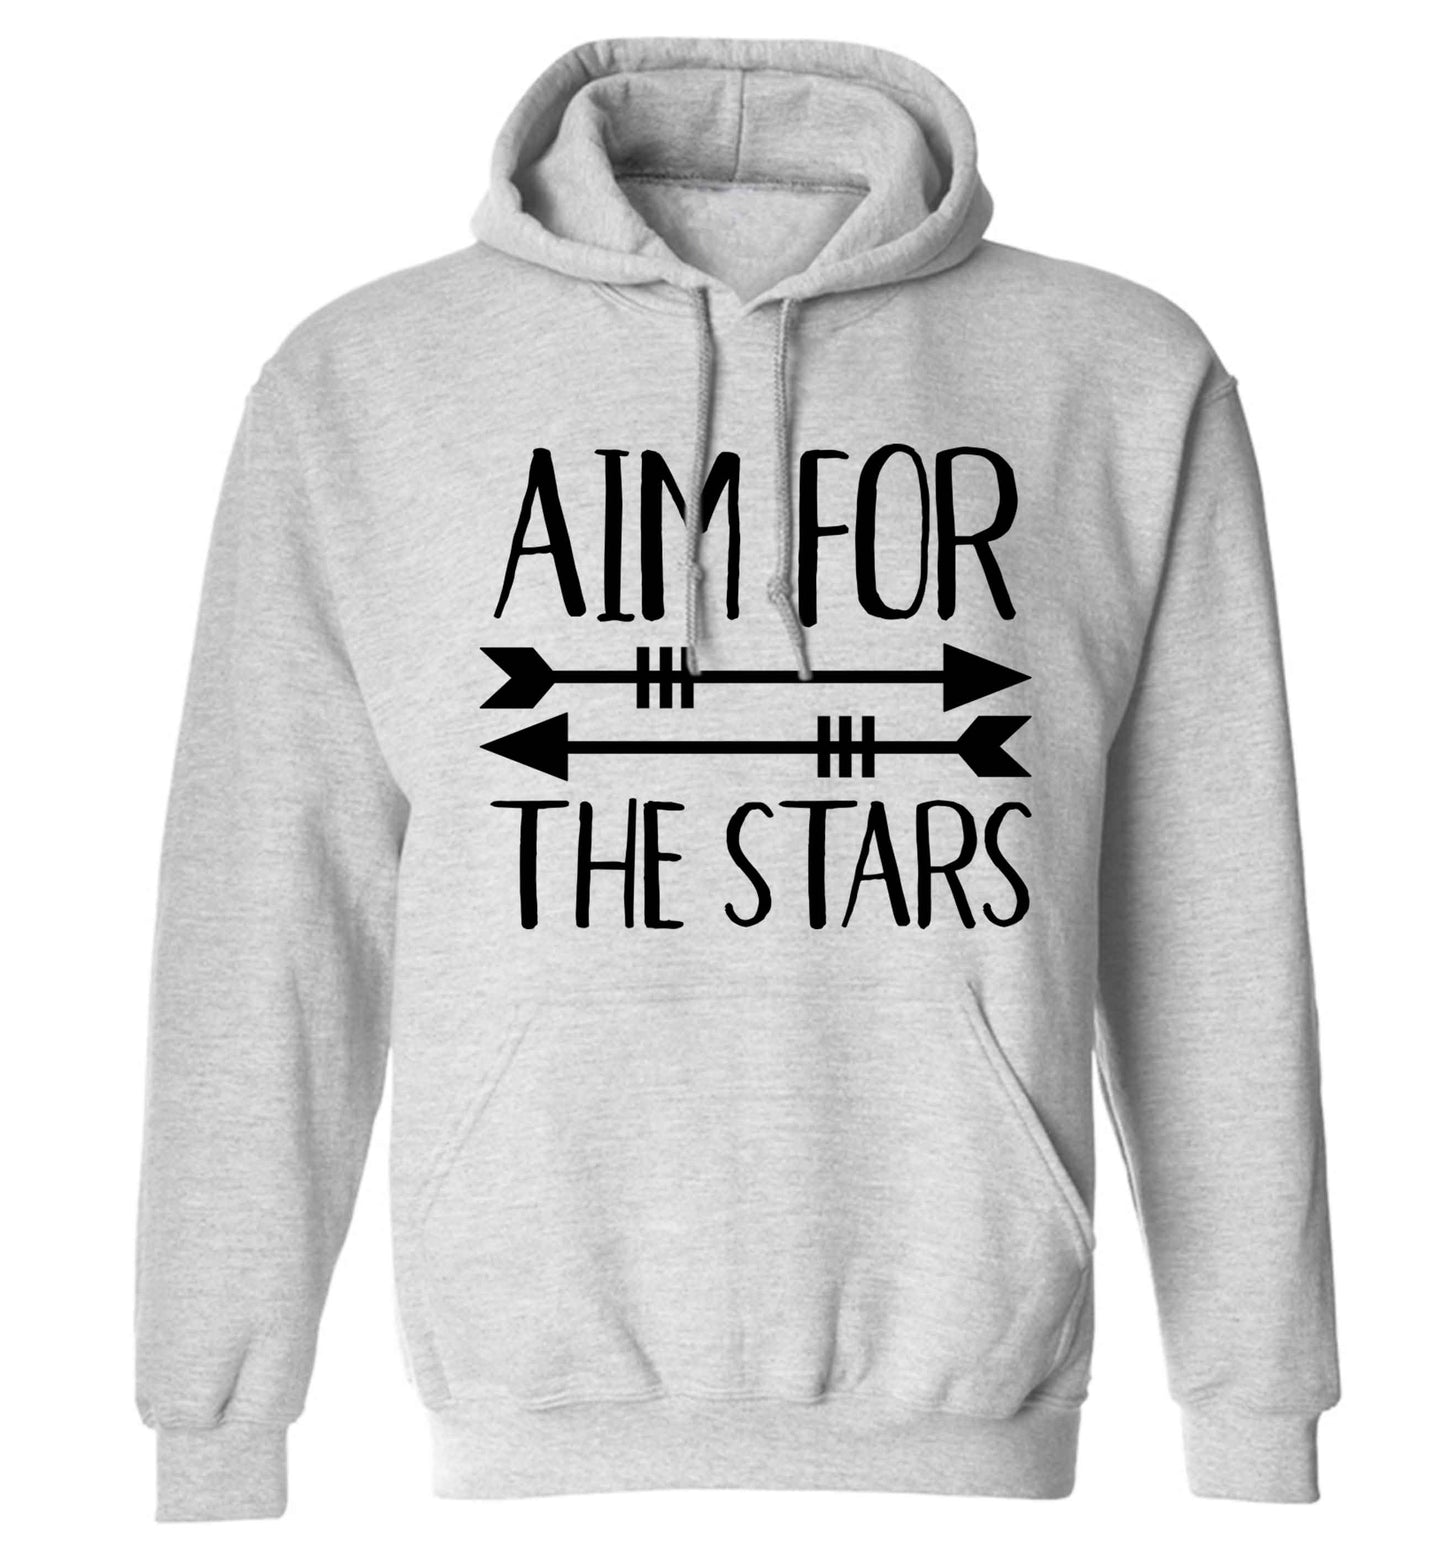 Aim for the stars adults unisex grey hoodie 2XL